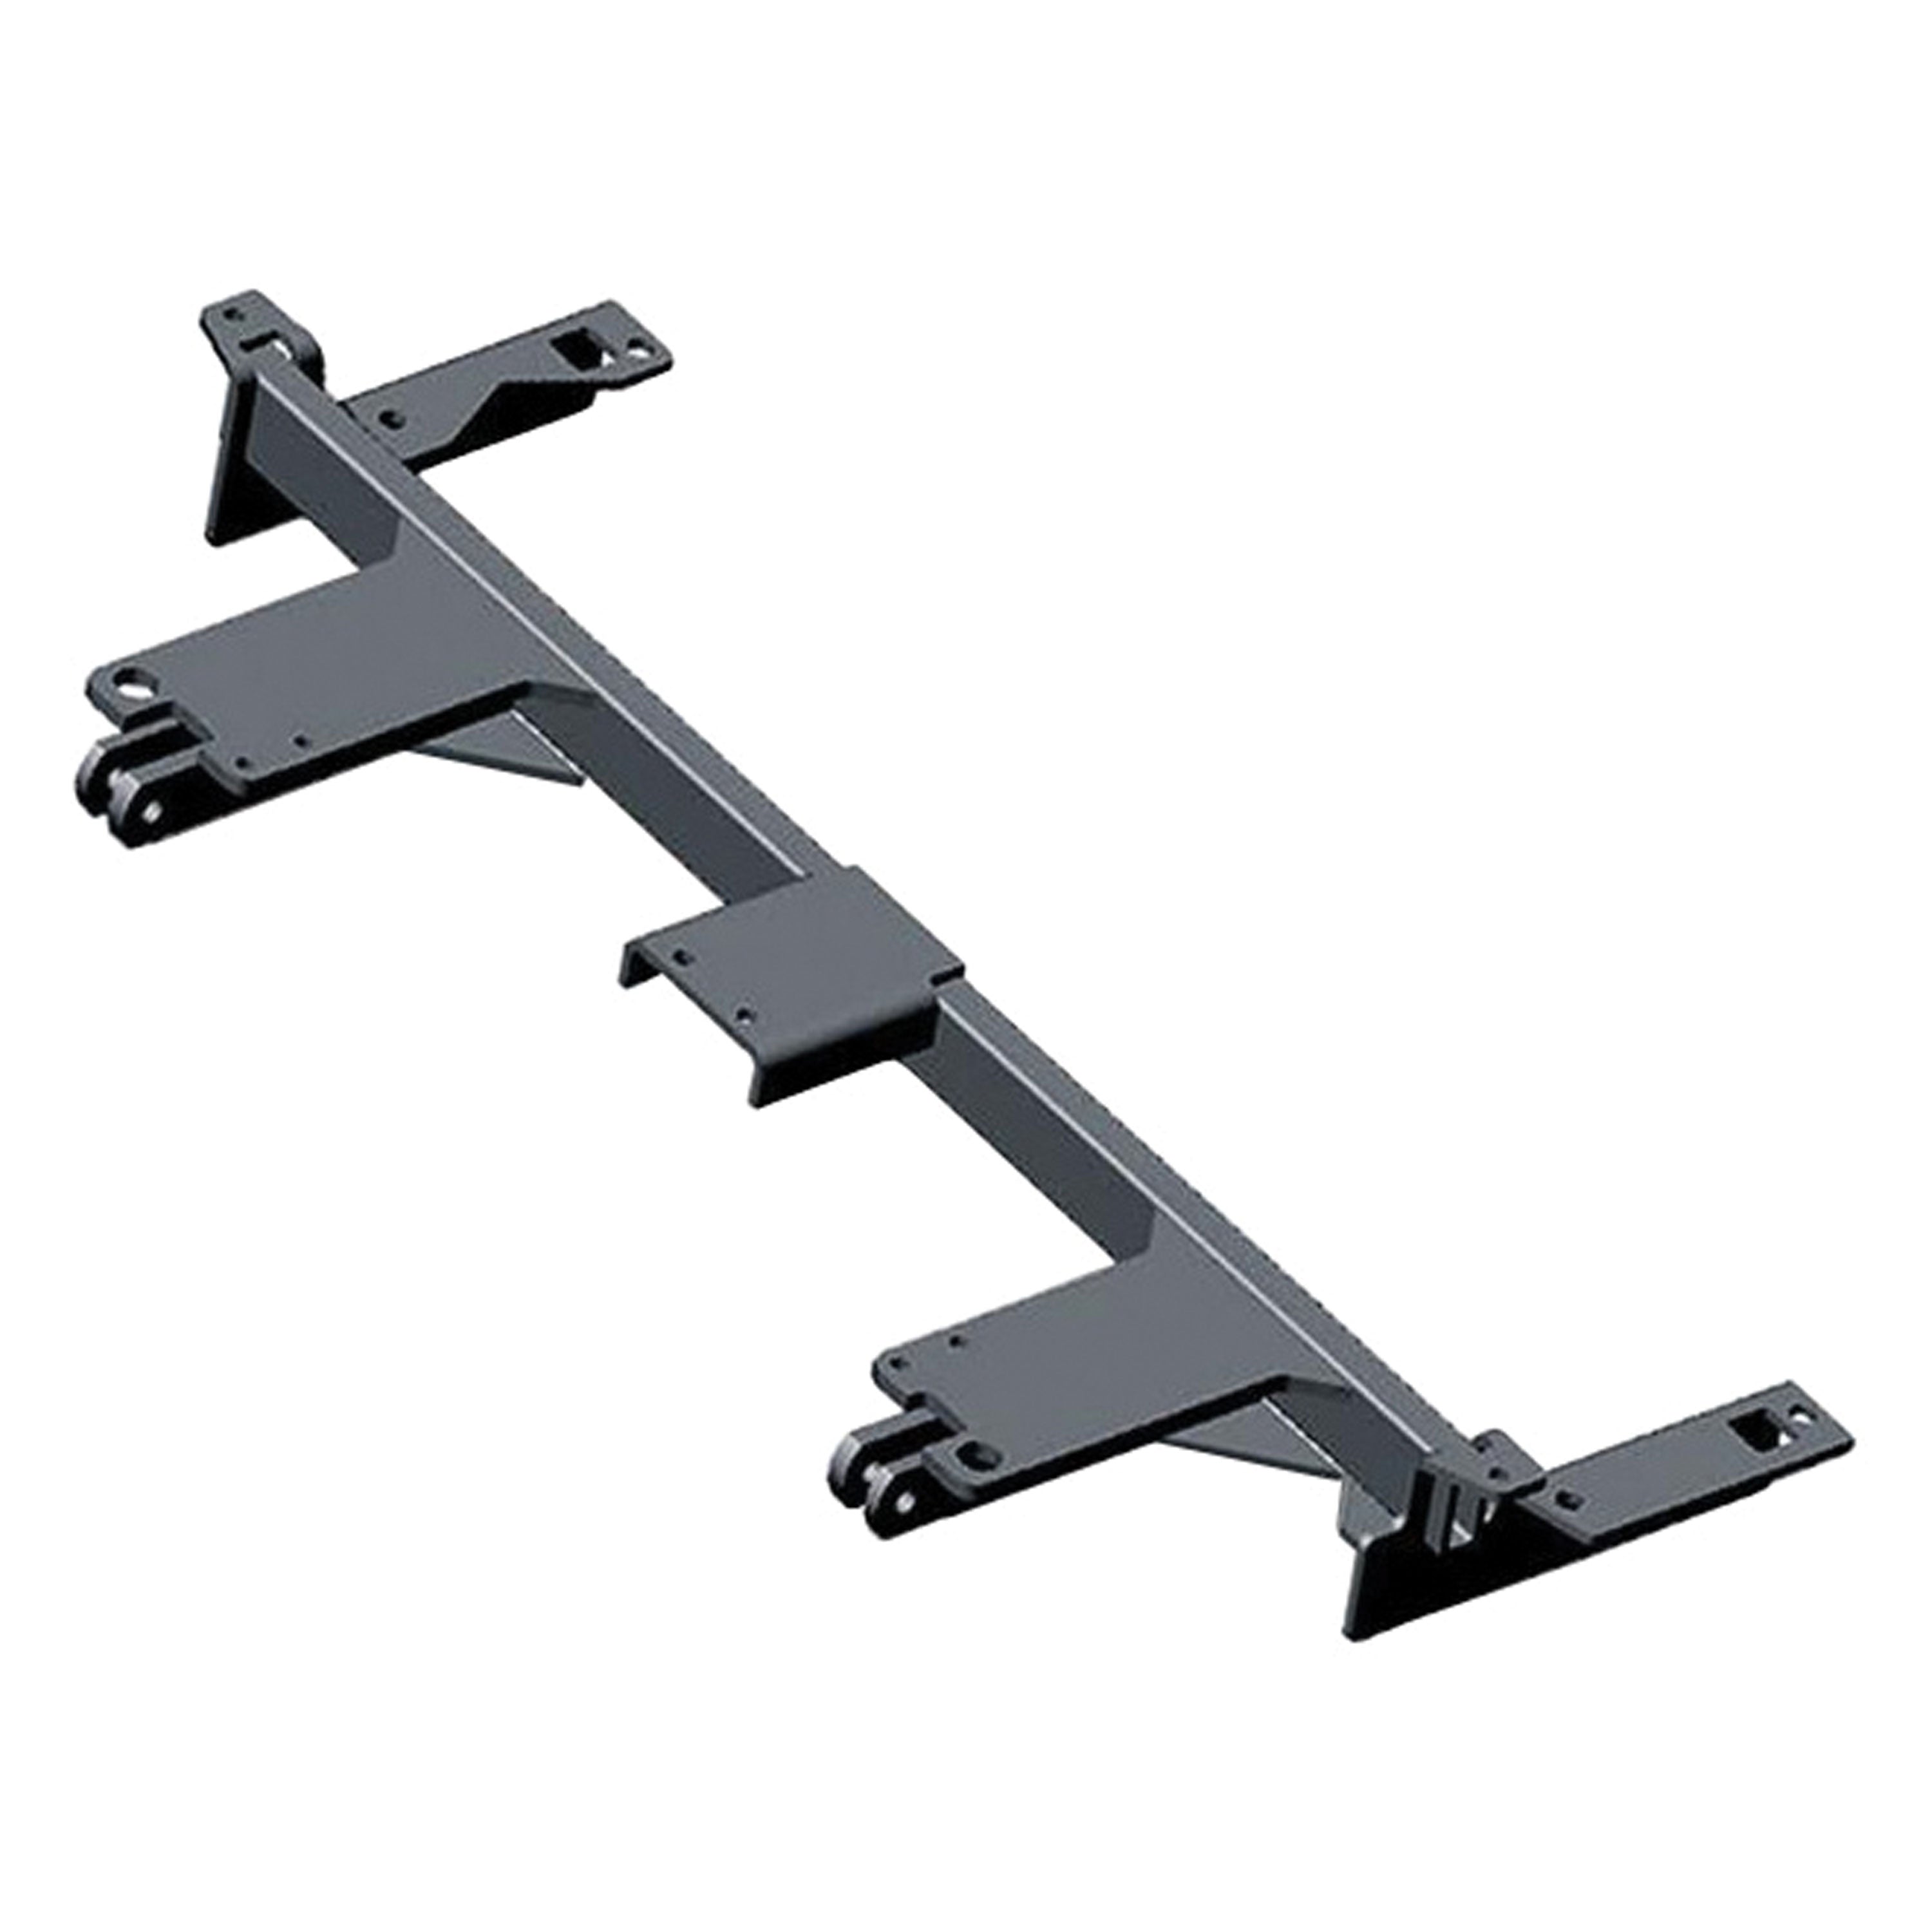 Demco 9518307 Tabless Baseplate for Jeep Cherokee (2014-2018)